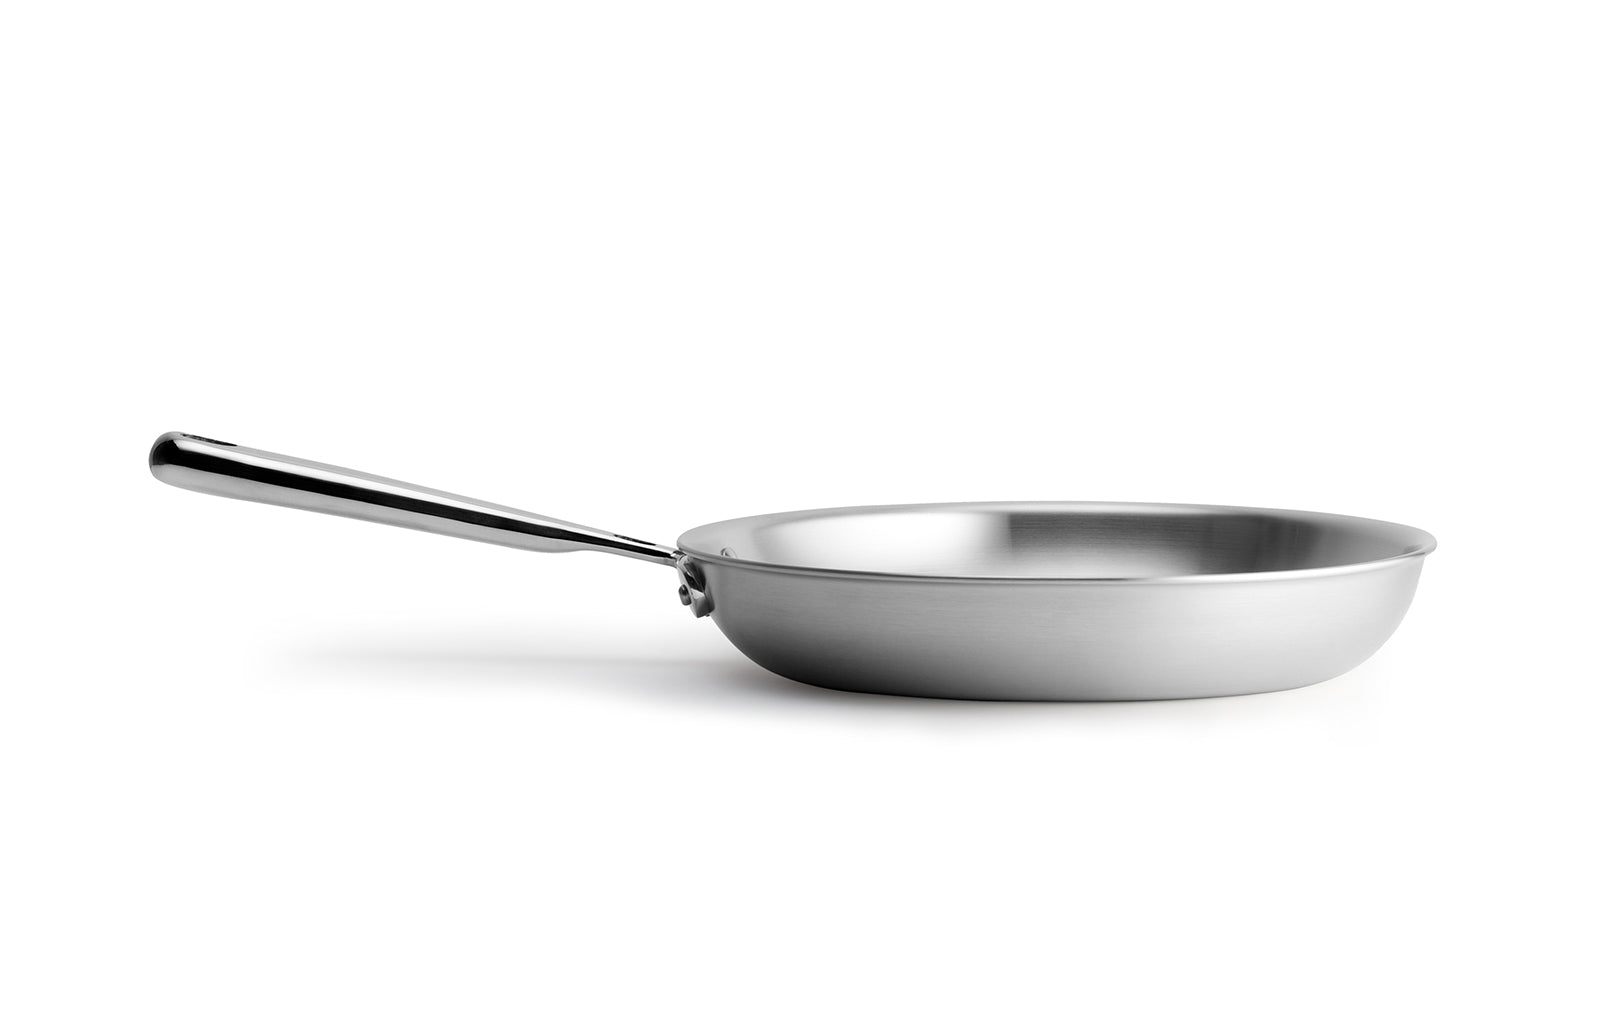 The Misen Stainless Skillet is an essential workhorse in any kitchen.